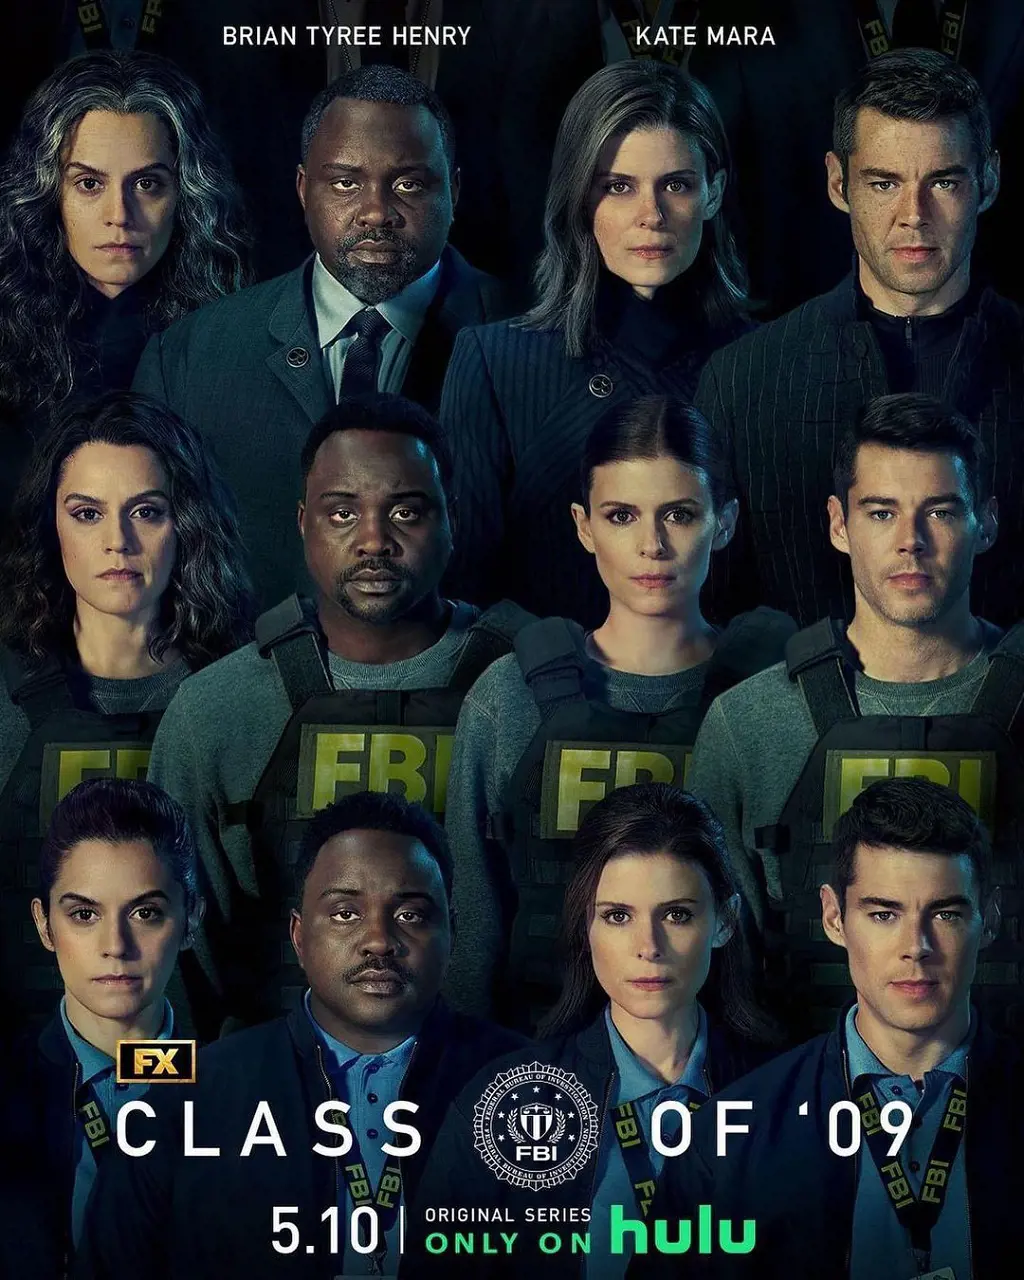 The new exclusive miniseries of Hulu about FBI agents. 